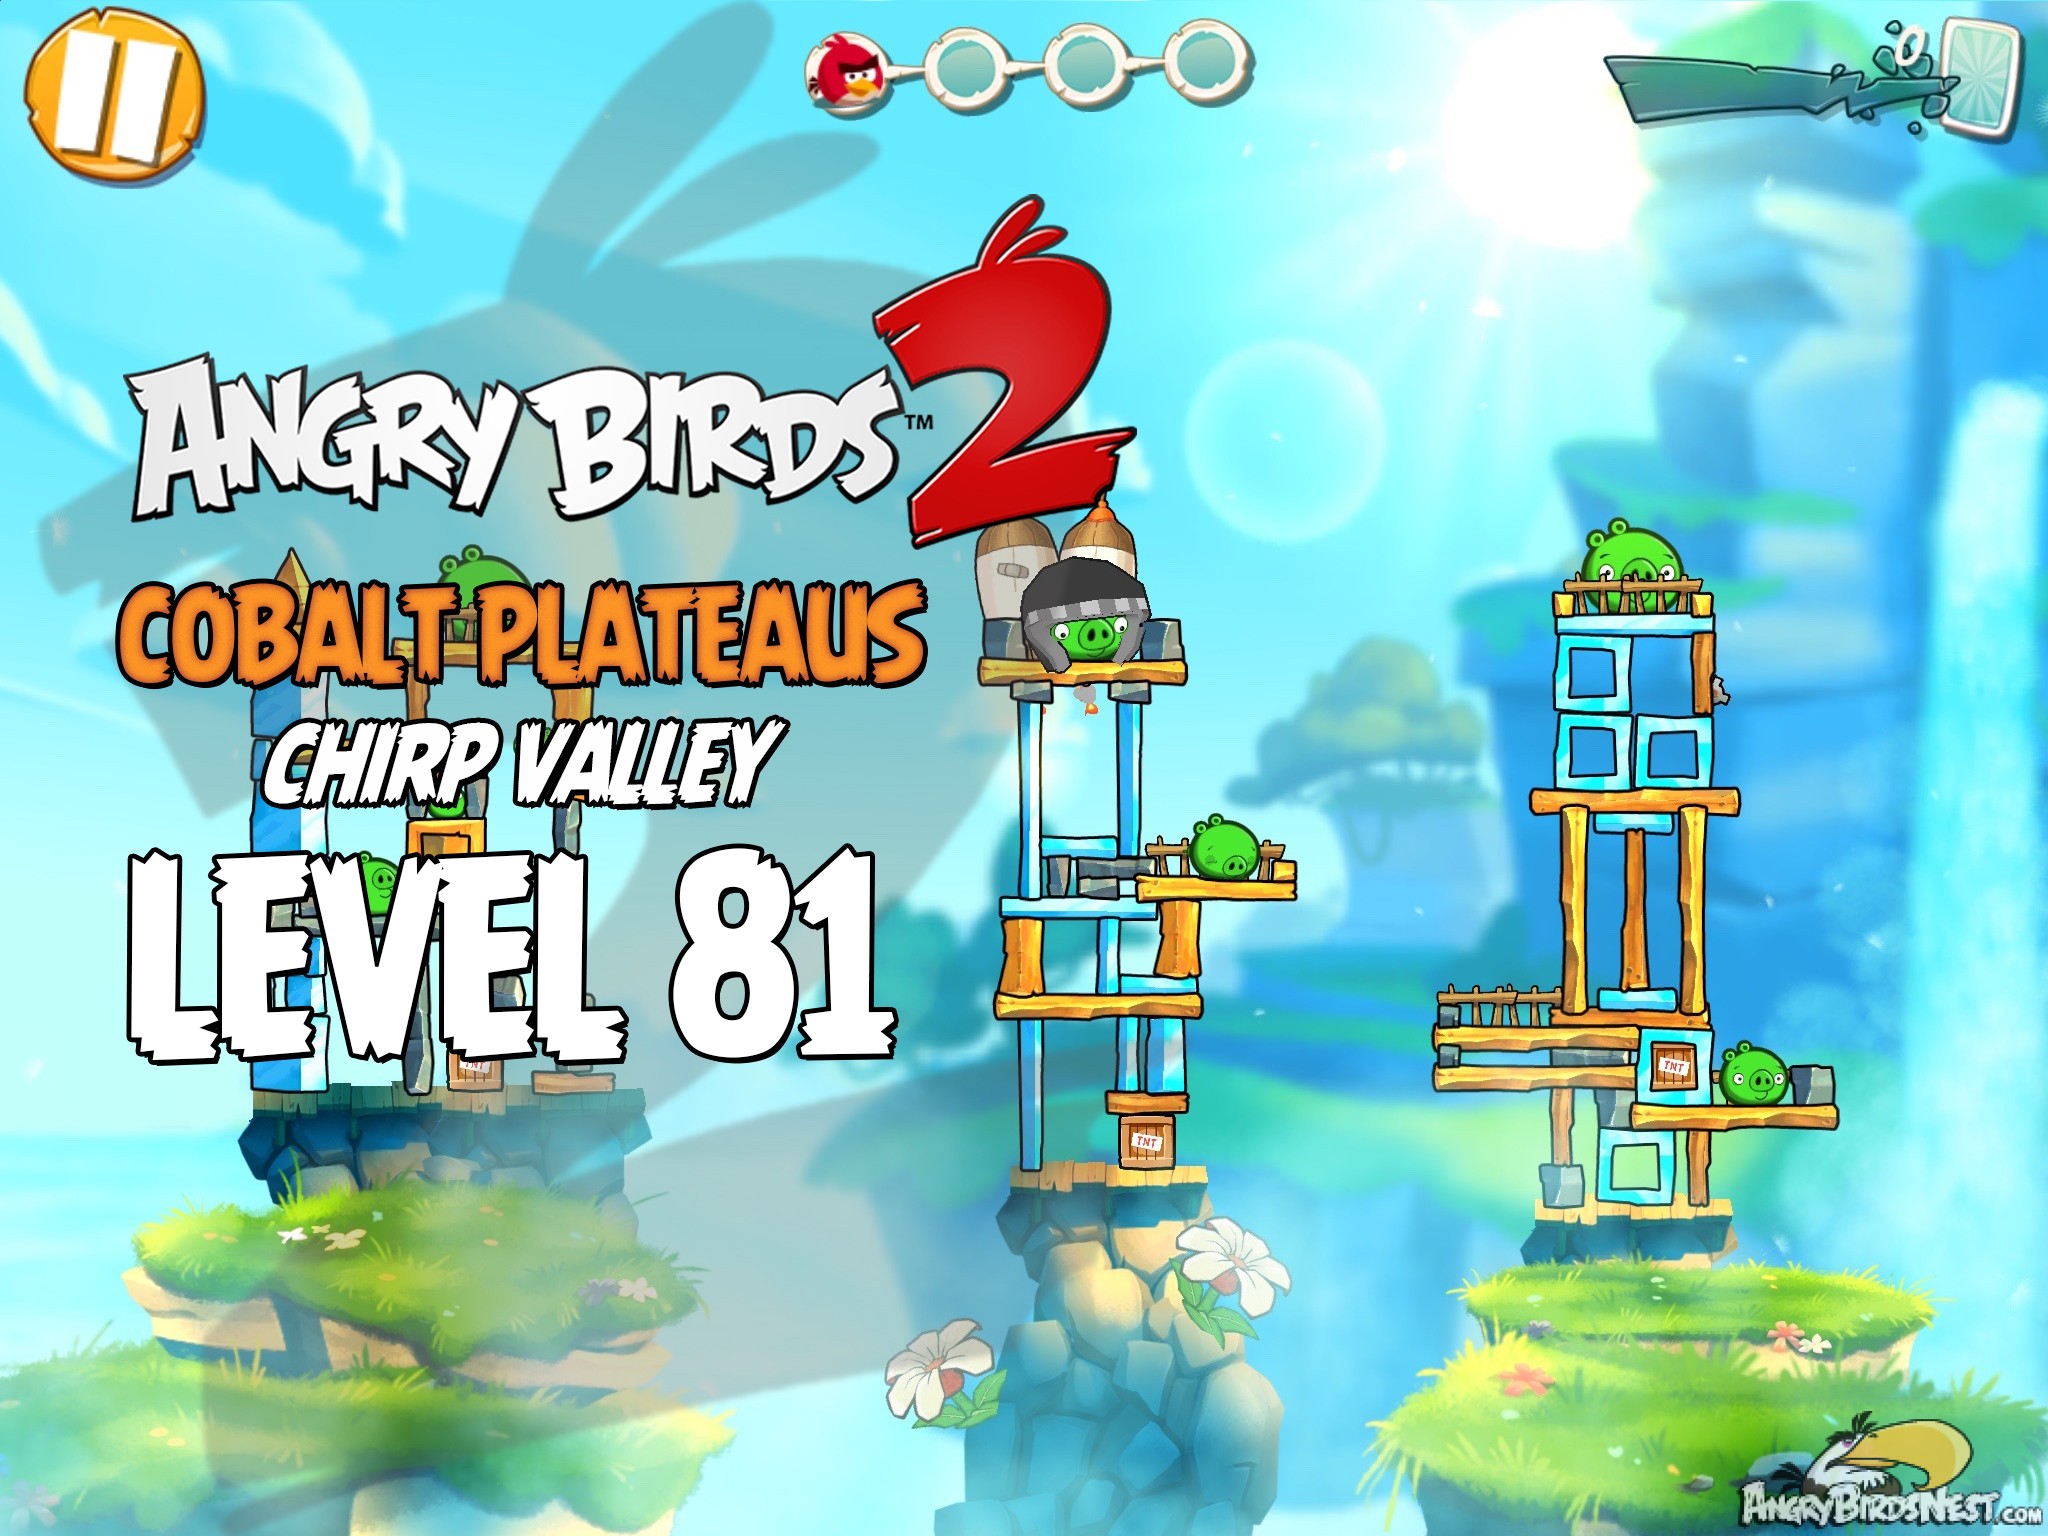 Angry Birds 2 Cobalt Plateaus Chirp Valley Level 81